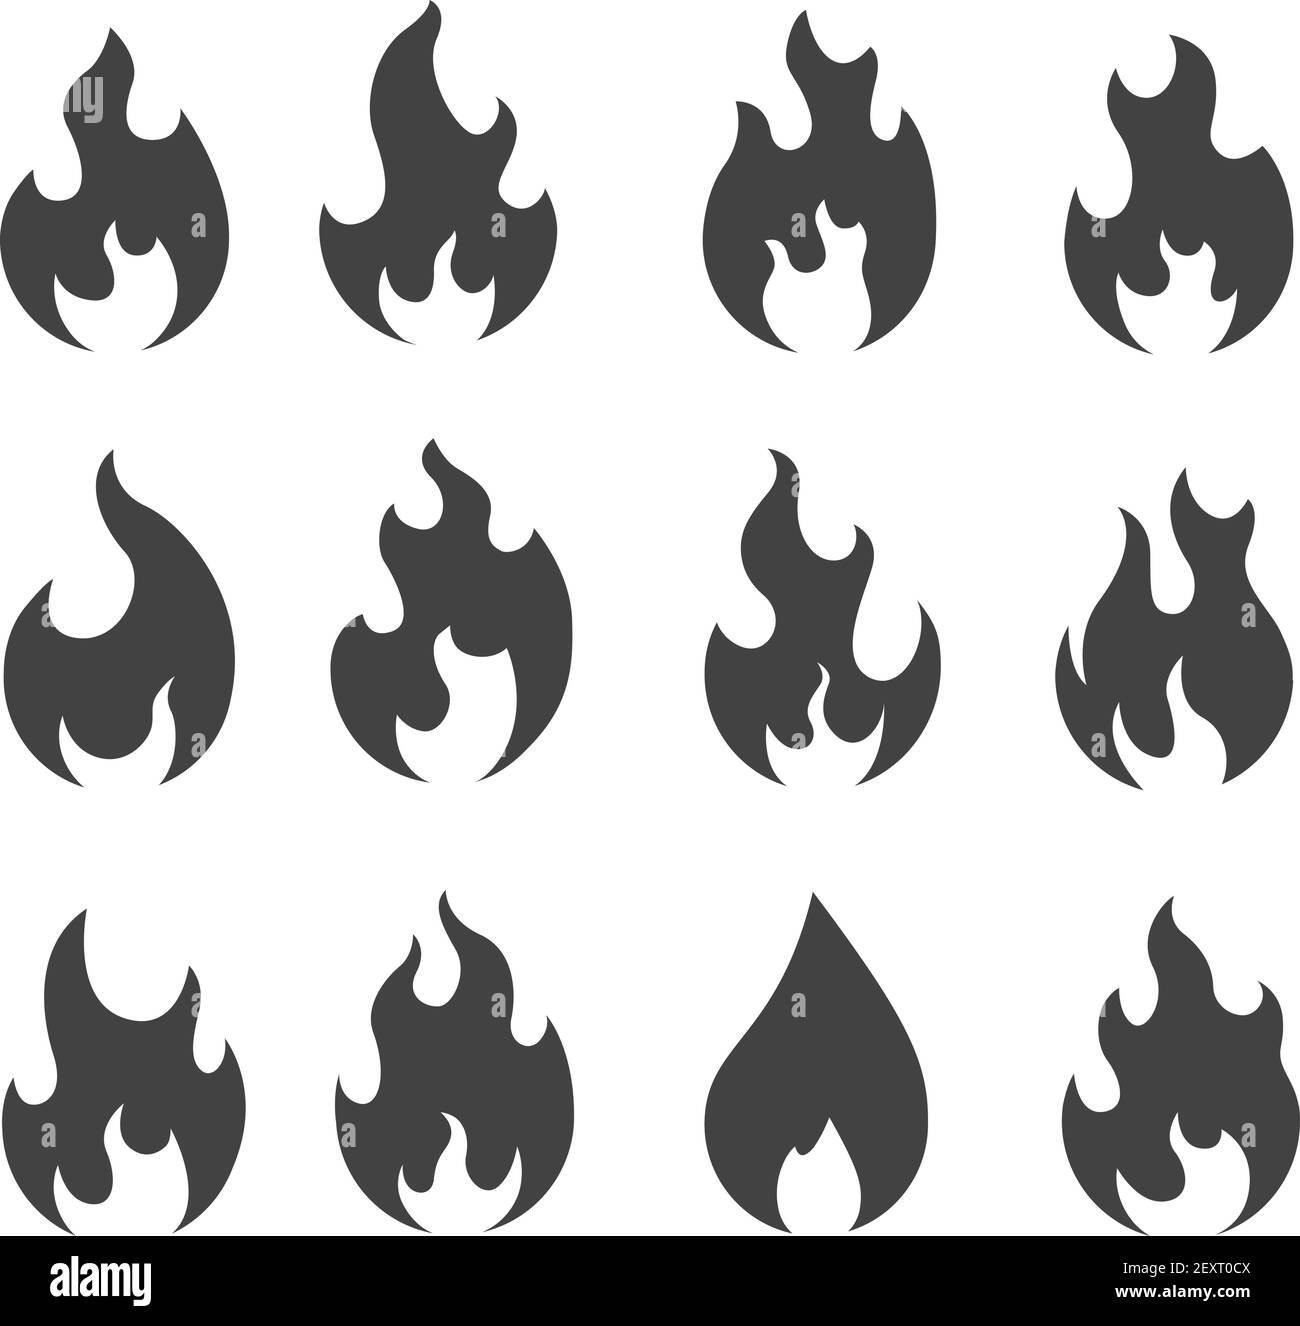 Fire silhouettes. Simple black outline fire flames, campfire isolated icons, ignite and fiery explosion signs Vector set of fire and flame, hot blaze campfire illustration Stock Vector